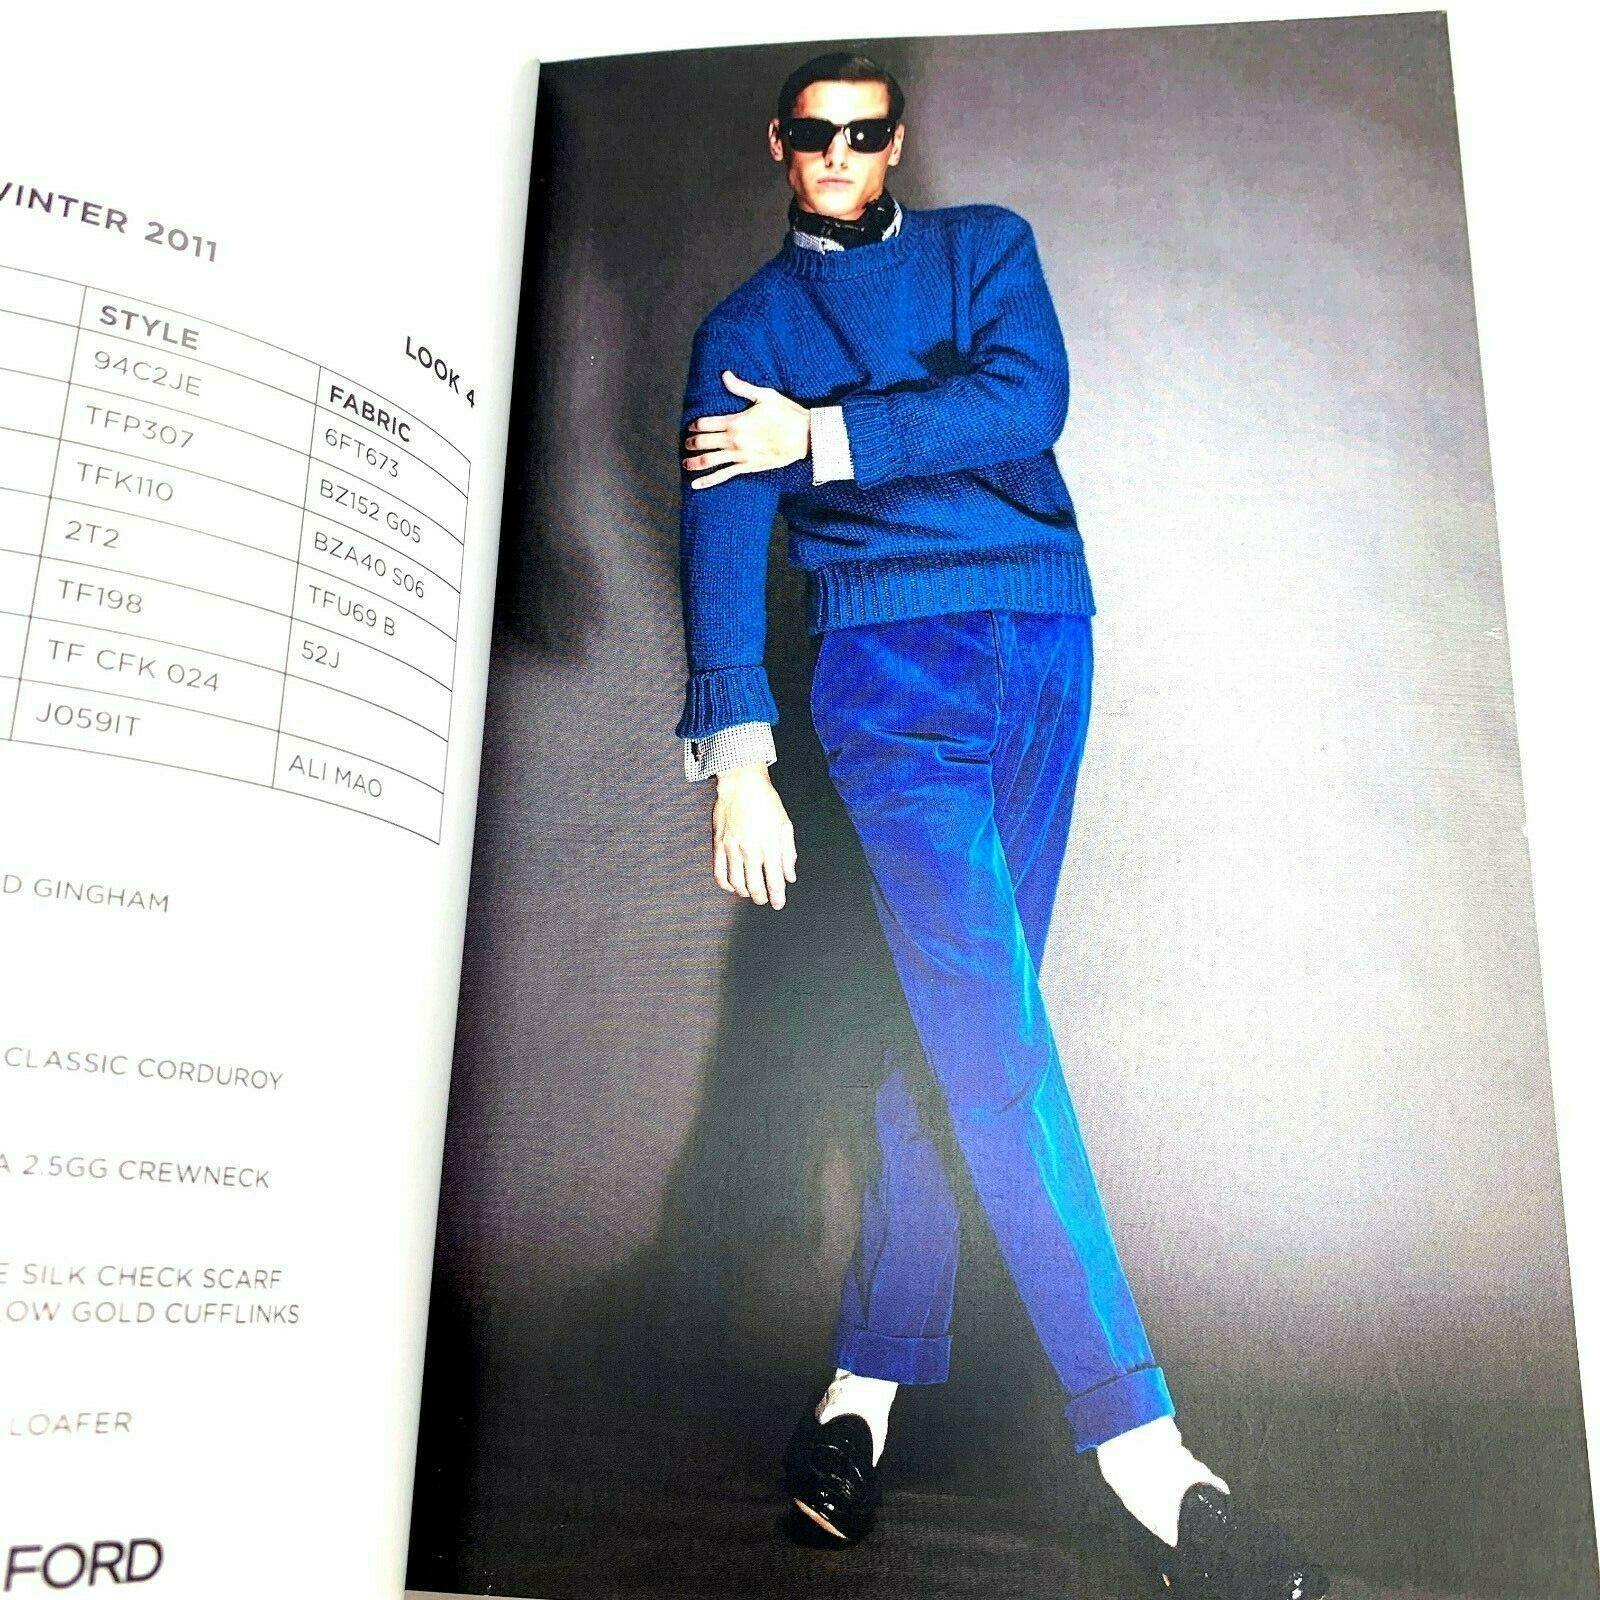 TOM FORD Collection Catalog Coffee Table Book - Genuine Design Luxury Consignment